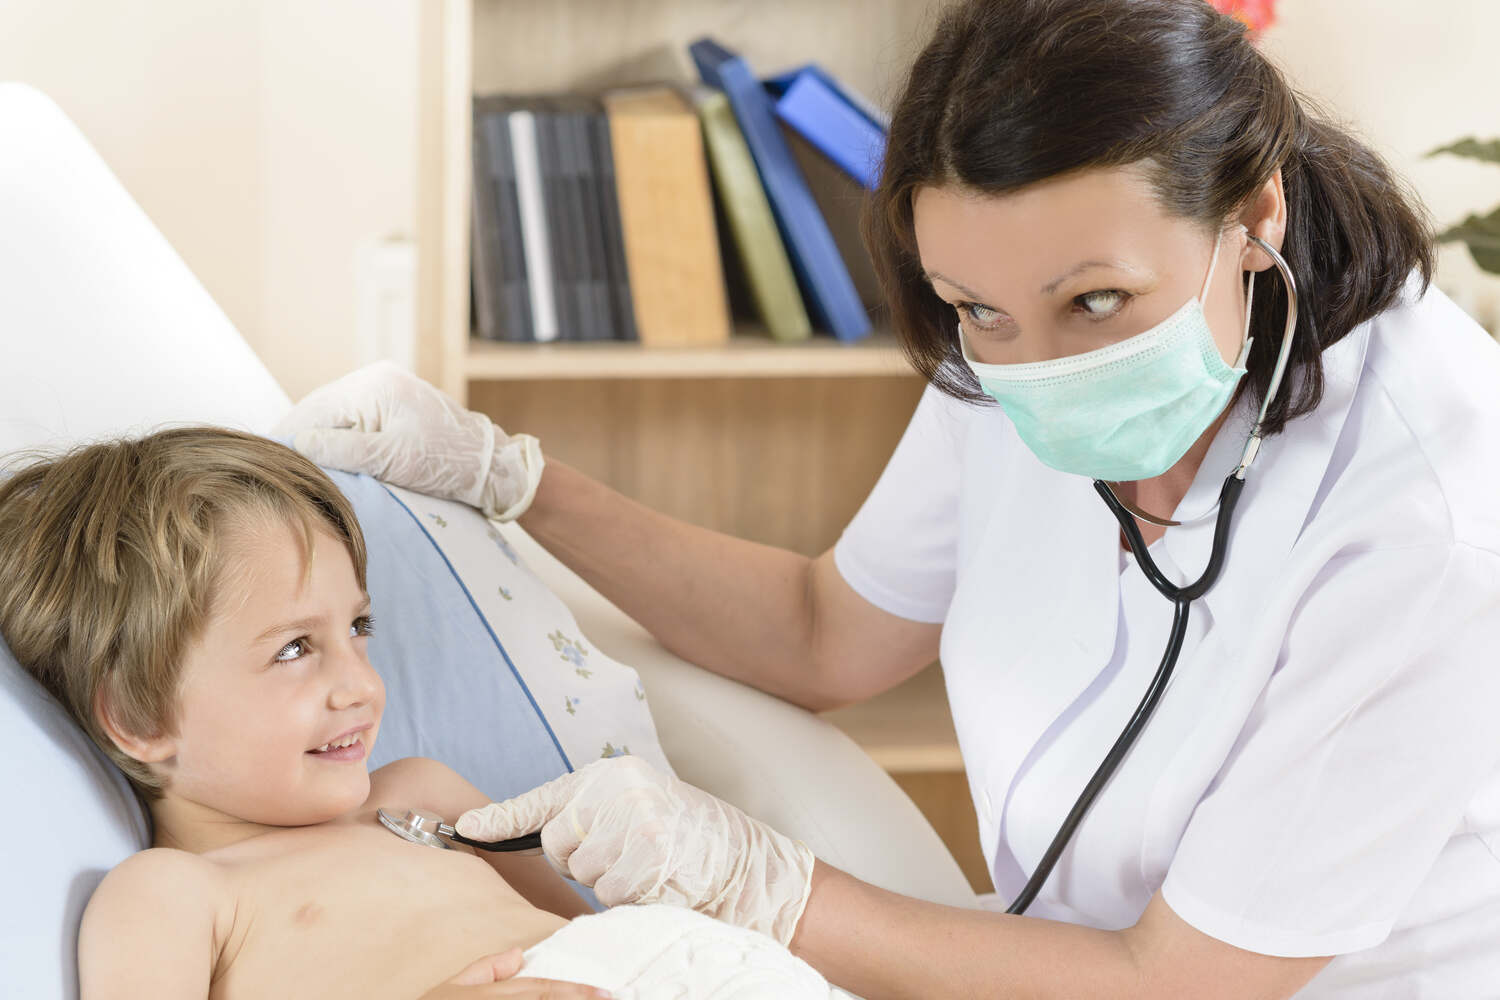 A doctor checking the heartbeat of a child